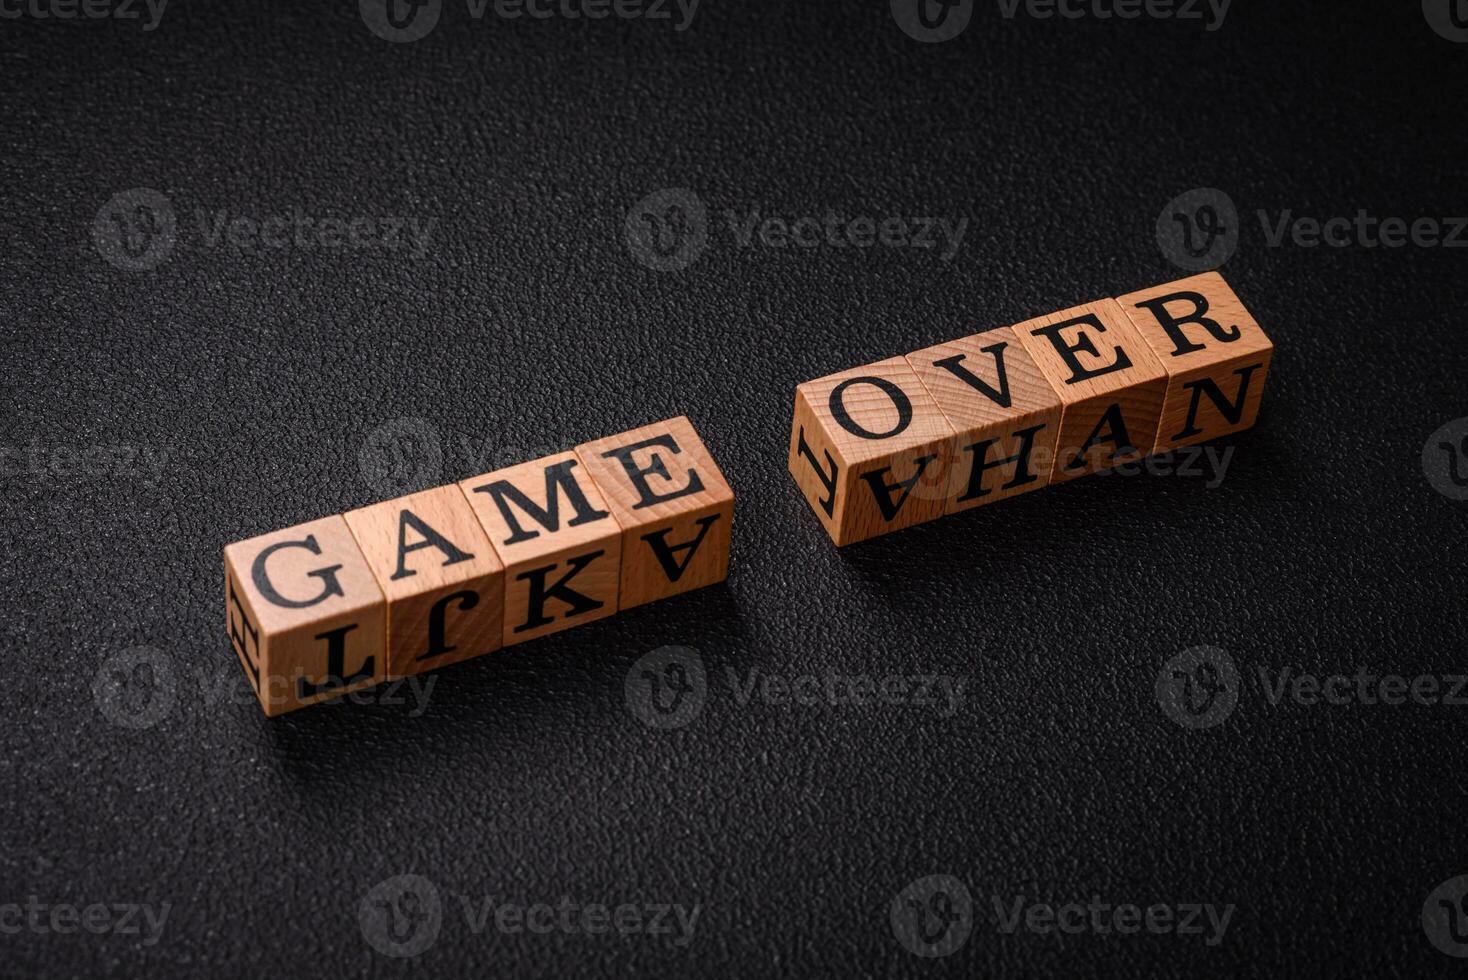 The inscription game over on wooden cubes on a dark concrete background photo